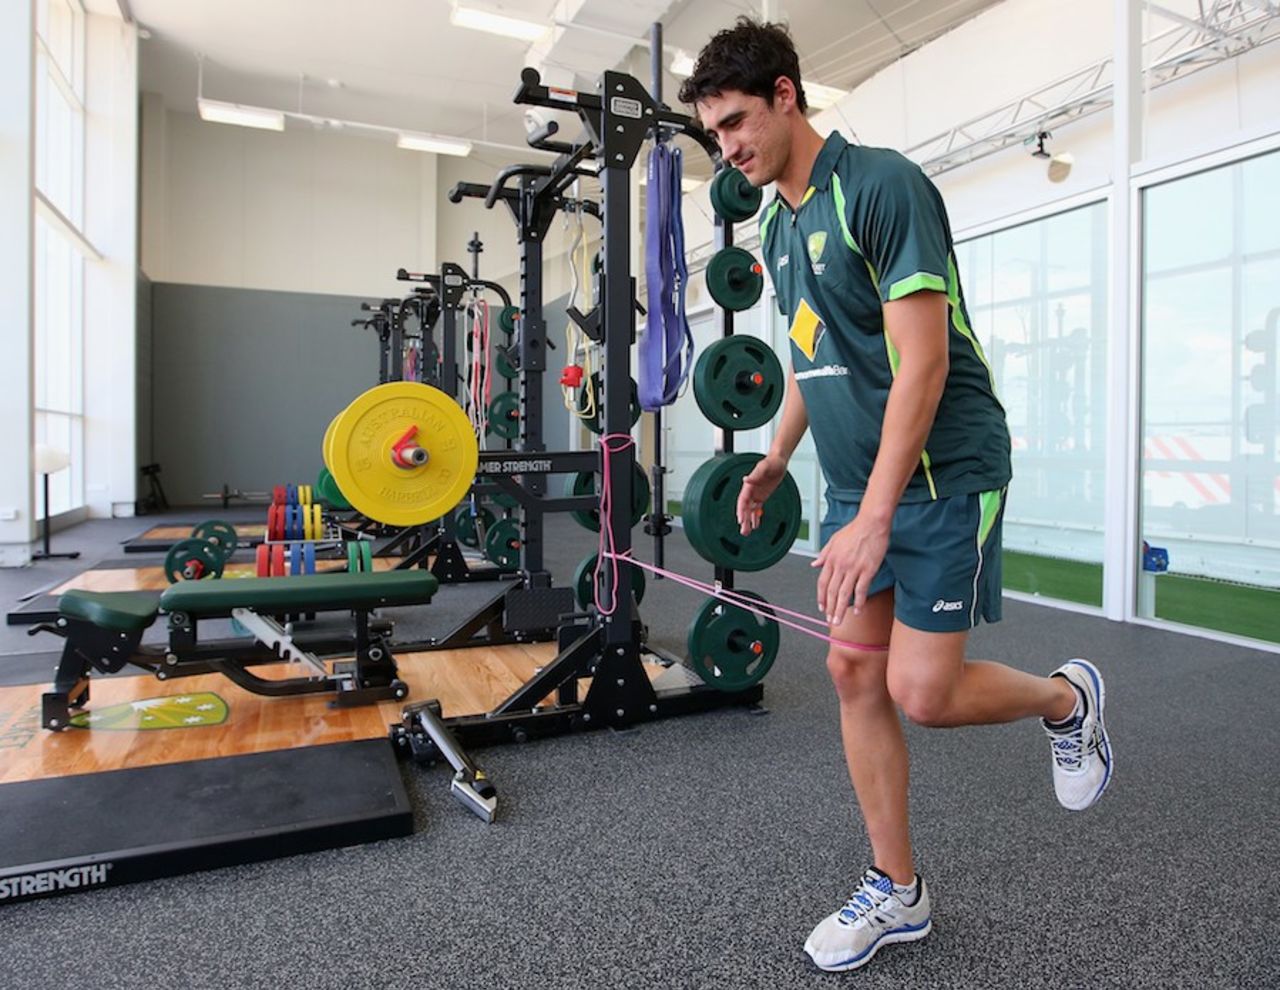 Mitchell Starc at the gym at the National Cricket Centre, Brisbane, November 12, 2013